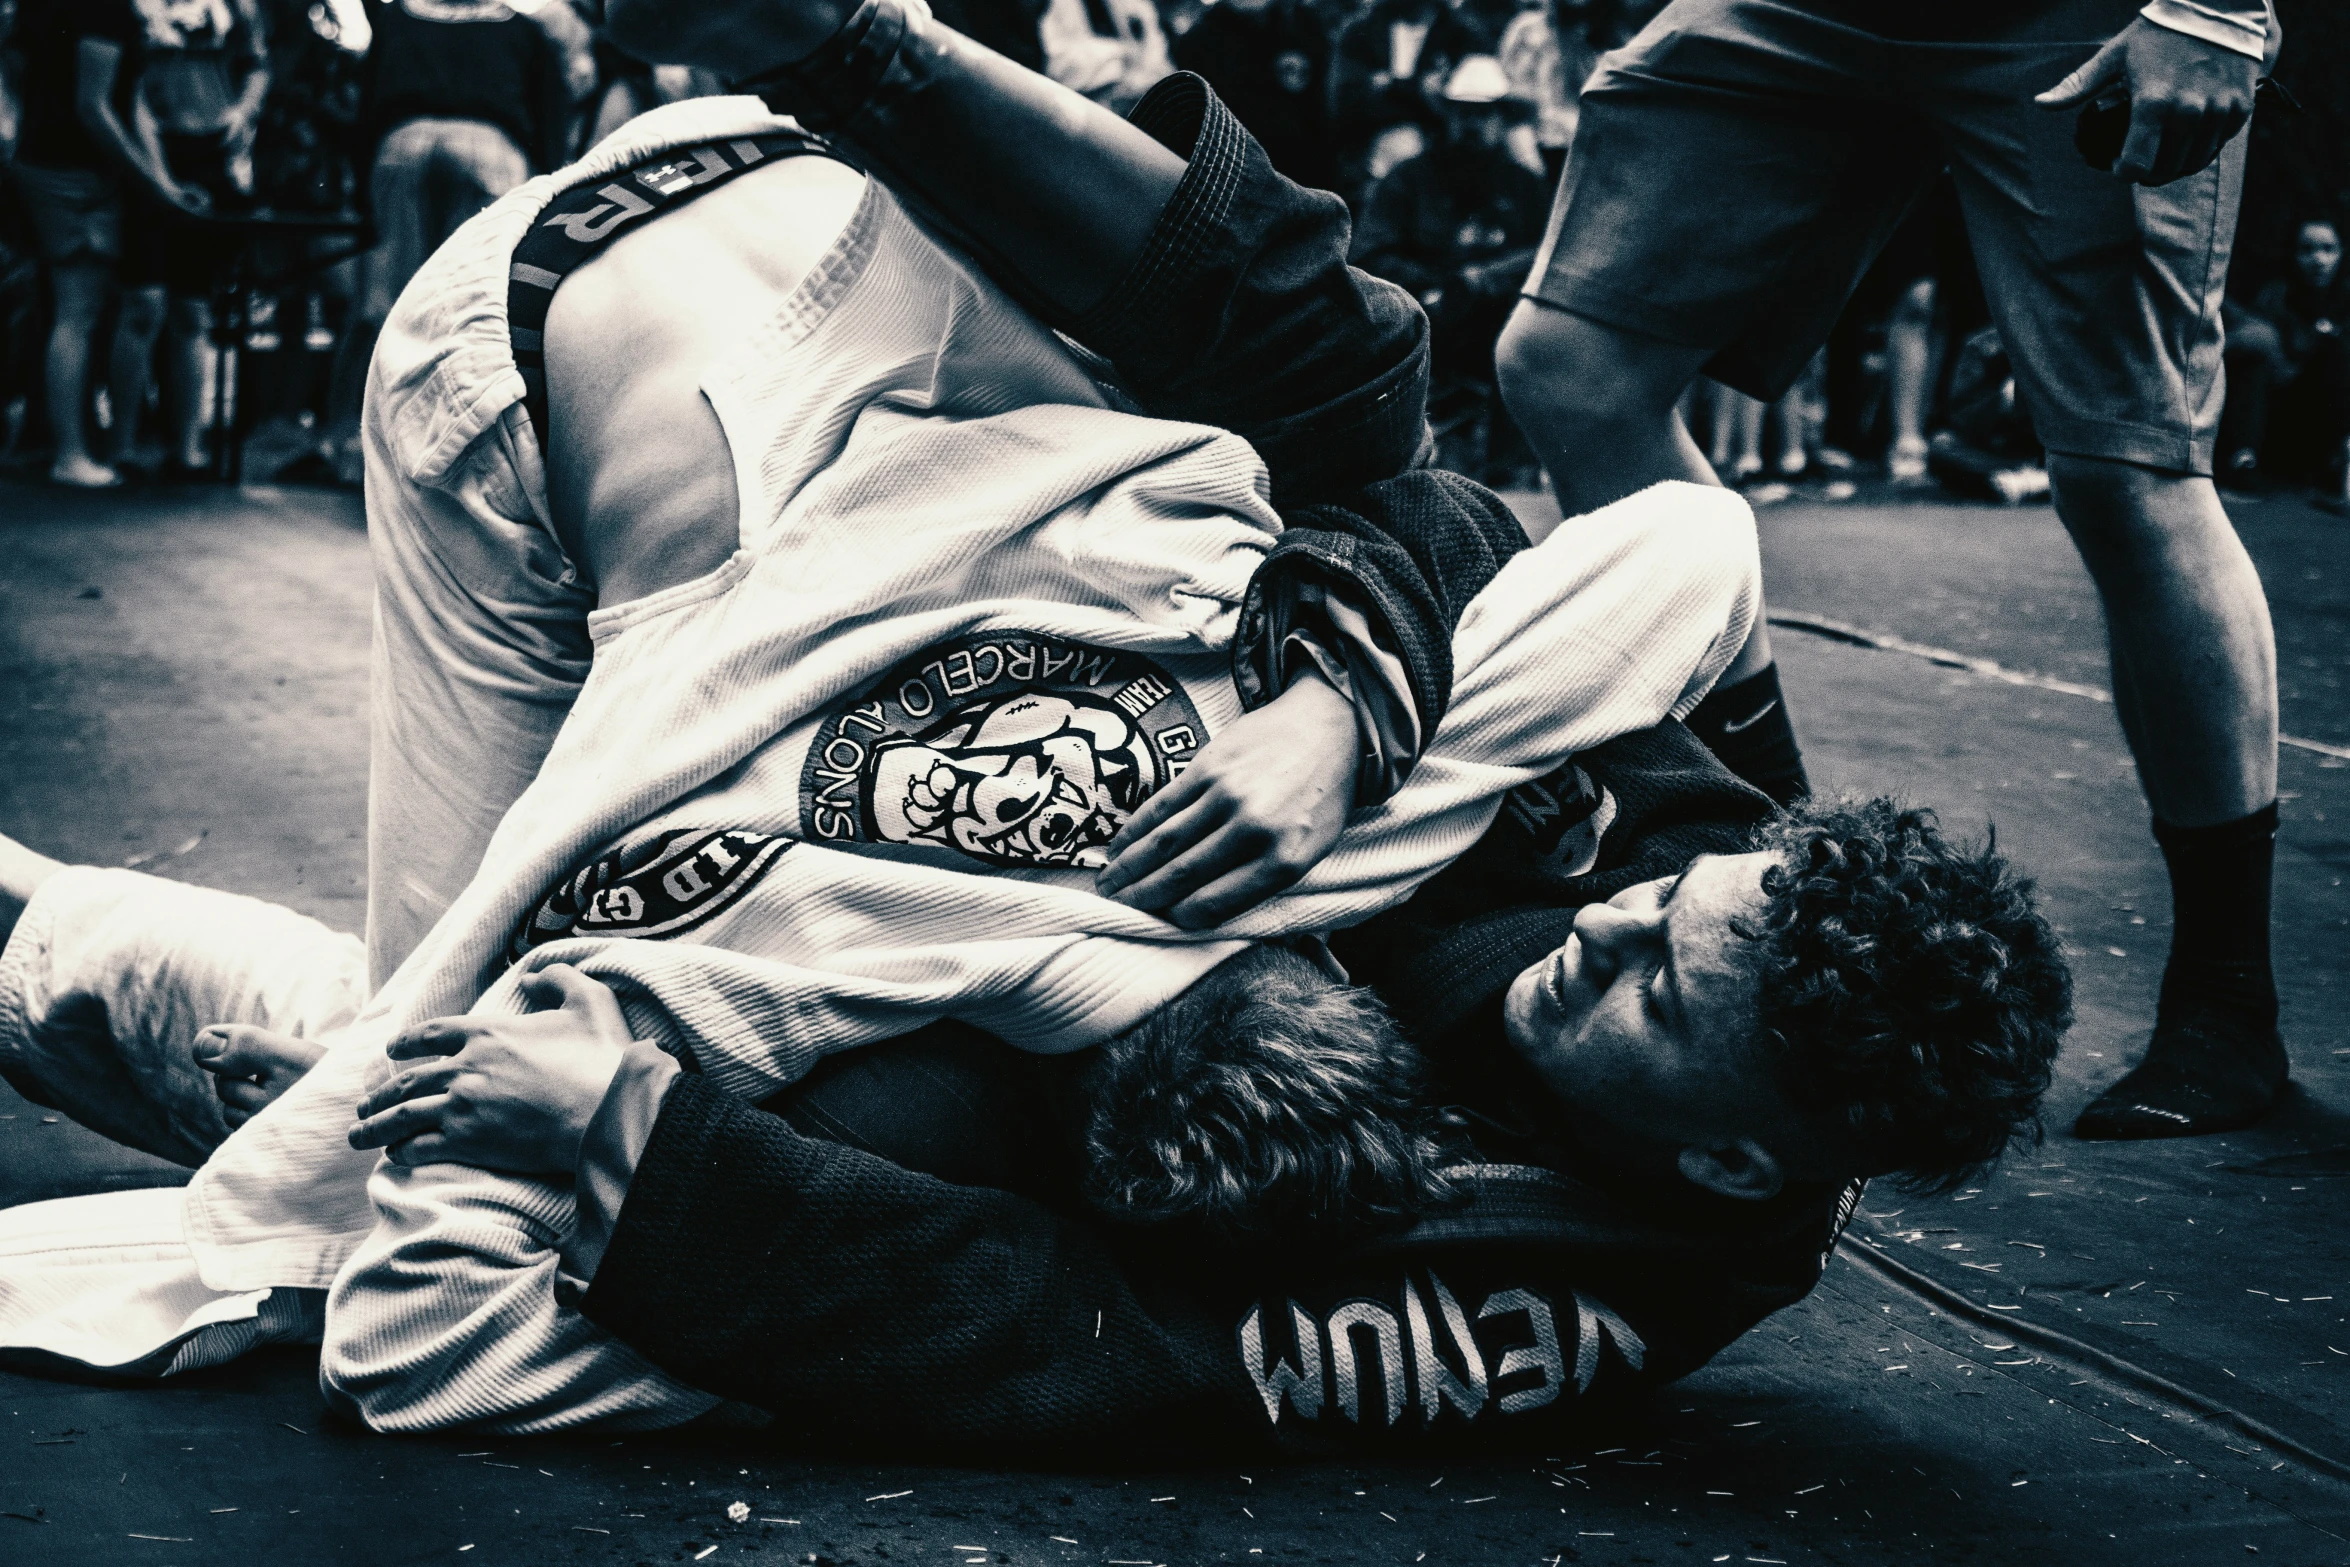 a person laying on the ground with a headlock